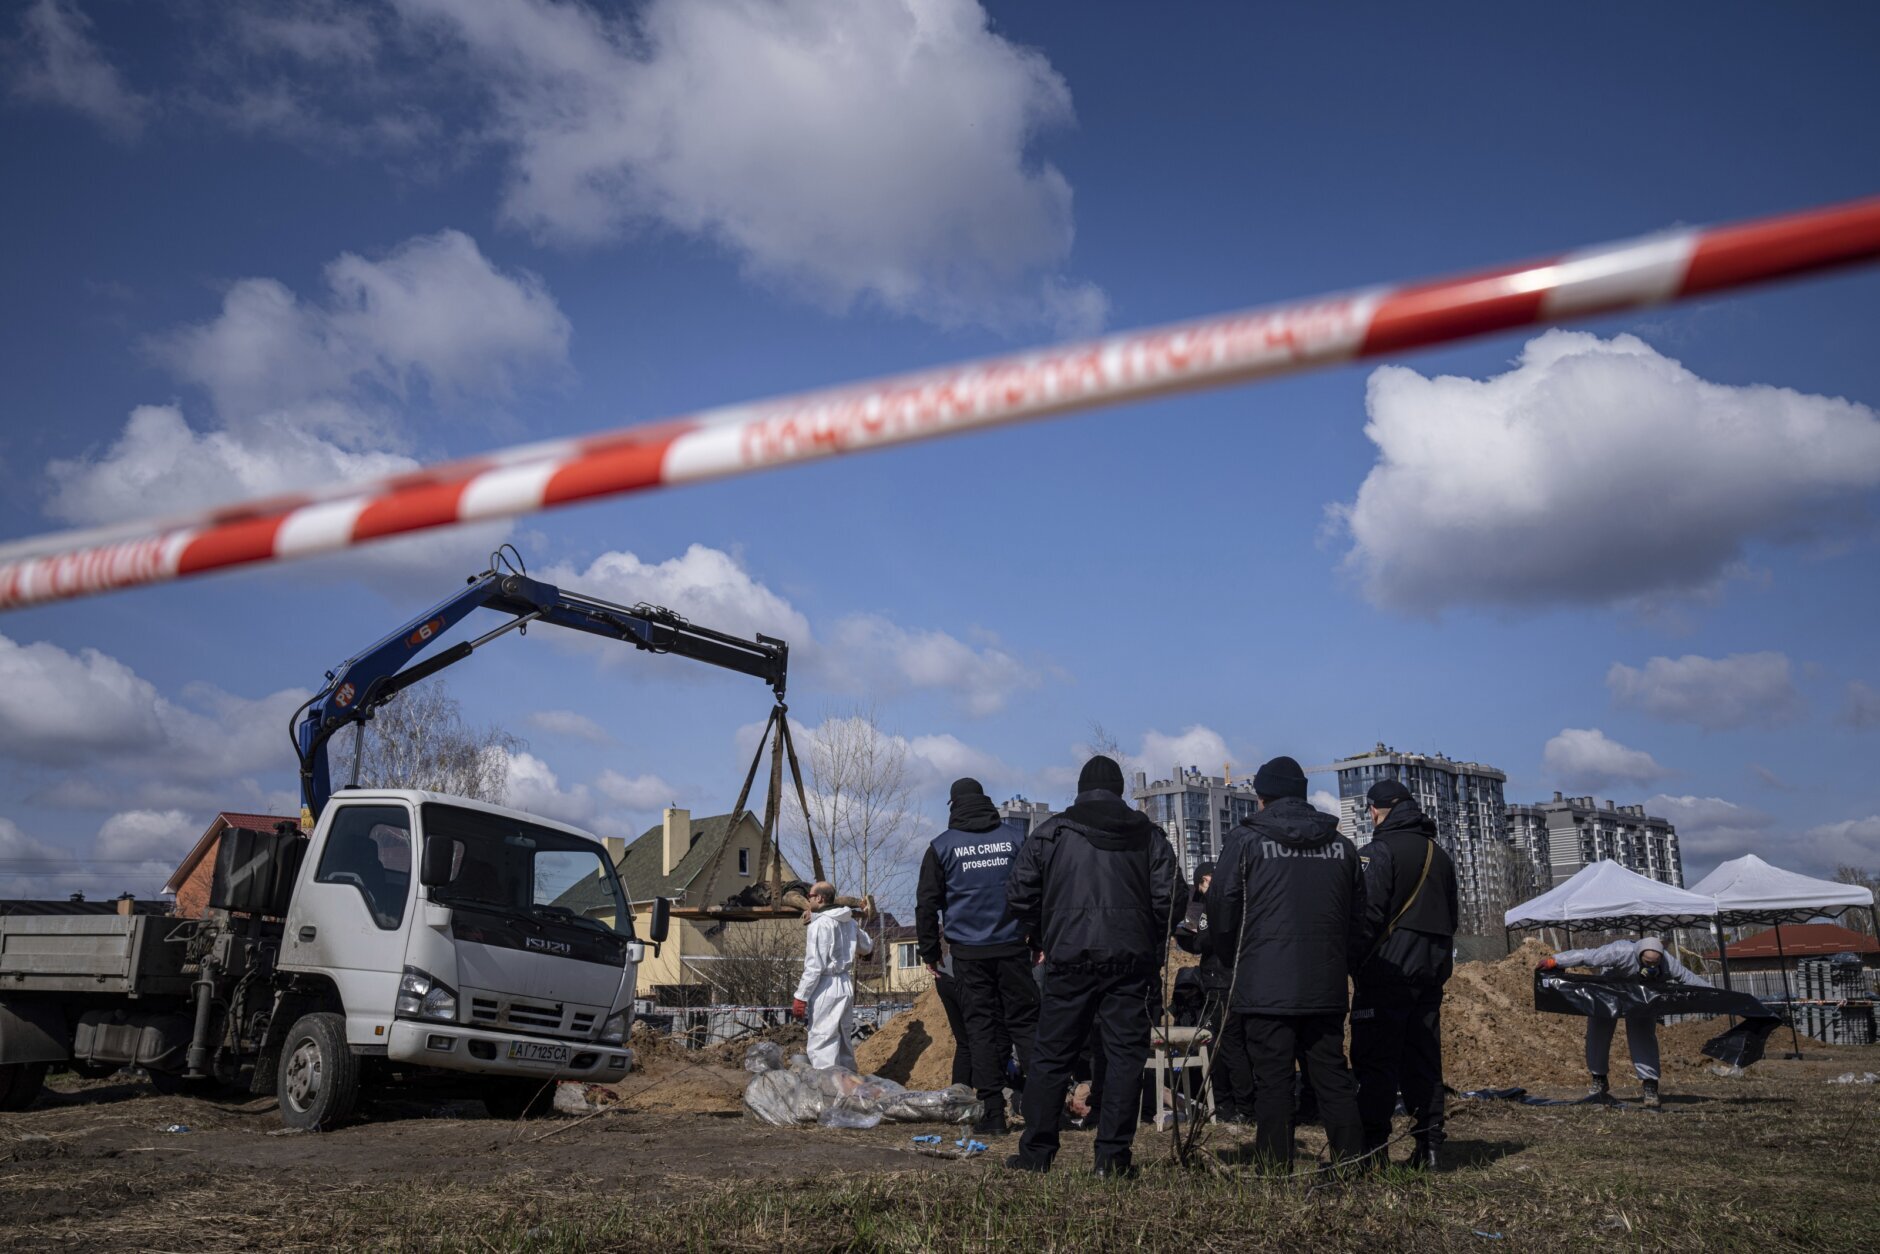 Forensic scientists and police inspect dead bodies of local residents after removing them from a mass grave in Bucha, on the outskirts of Kyiv, Ukraine, Monday, April 11, 2022. (AP Photo/Evgeniy Maloletka)